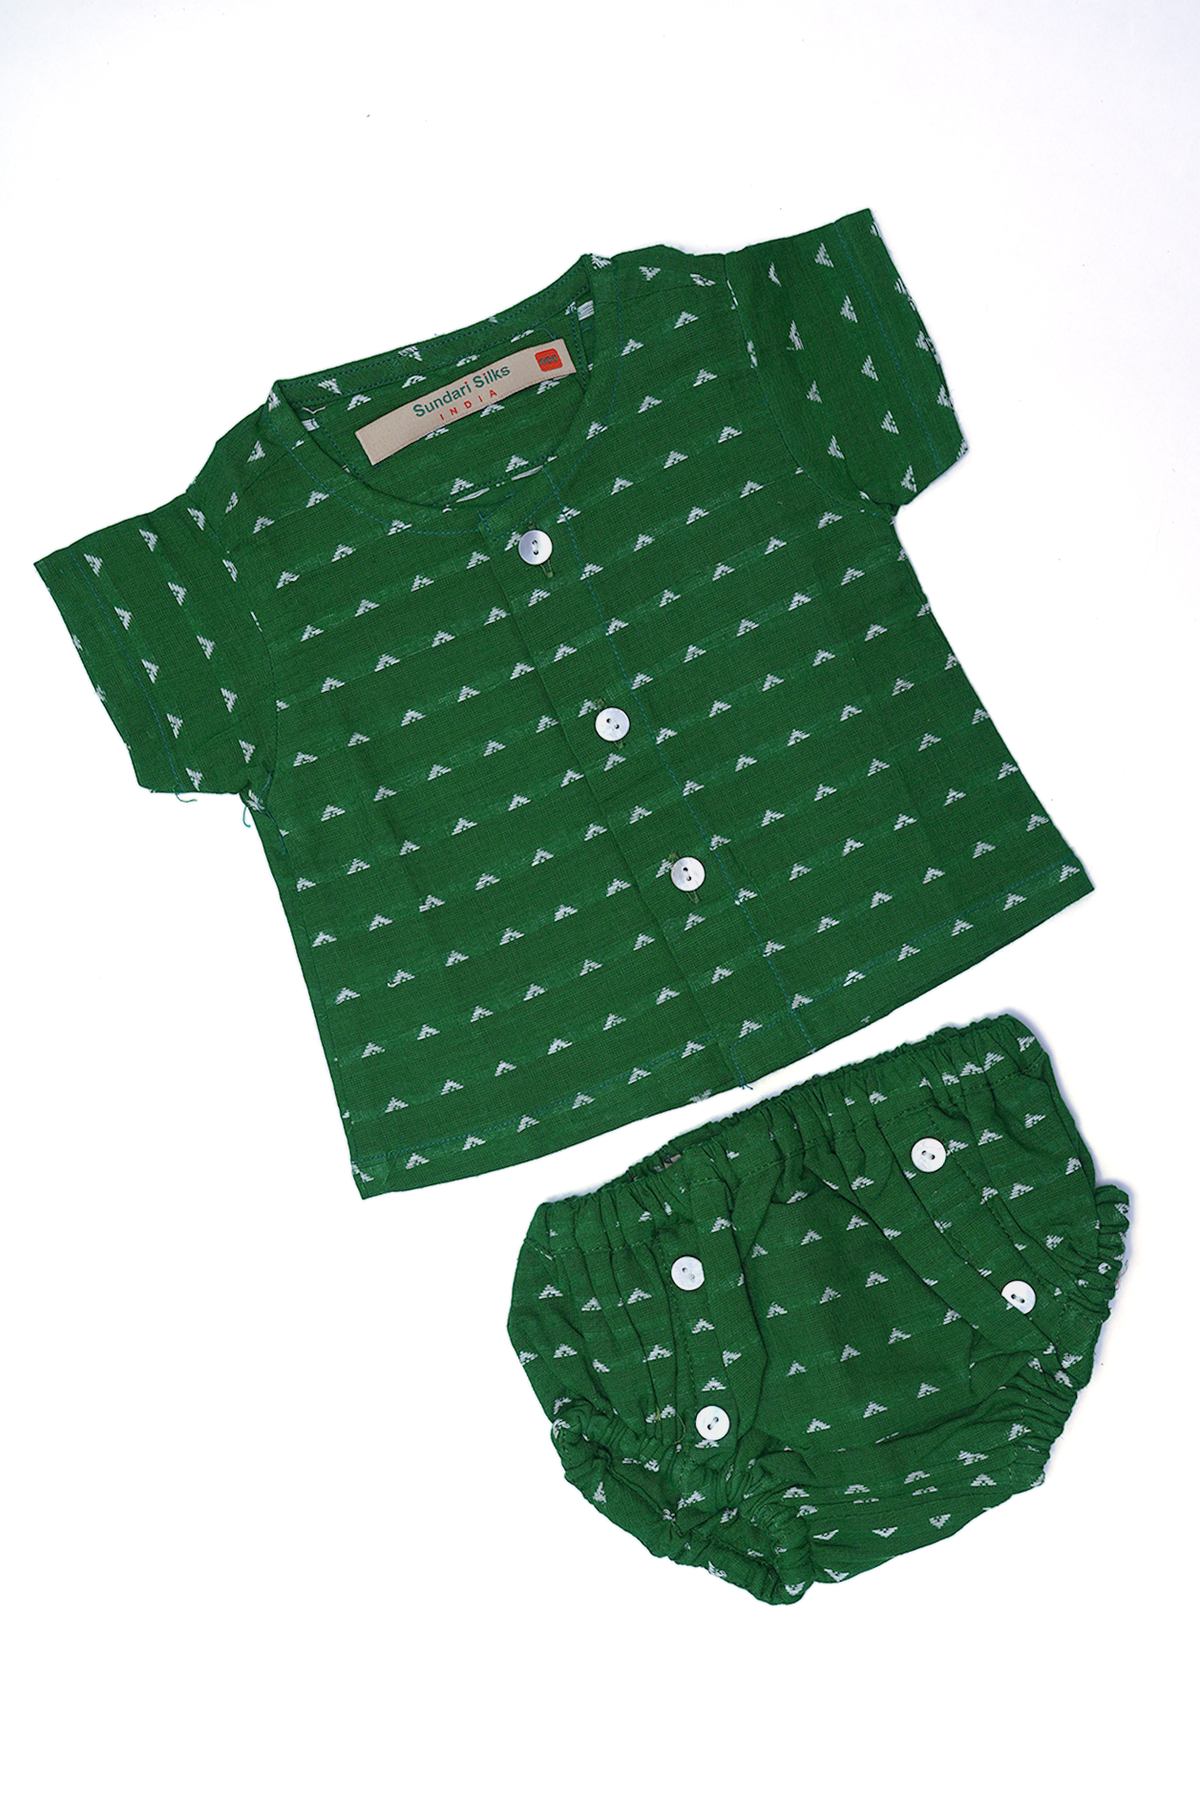 A-Line Green Top And Diaper Infant Wear Boys Co-Ord Set Of 2